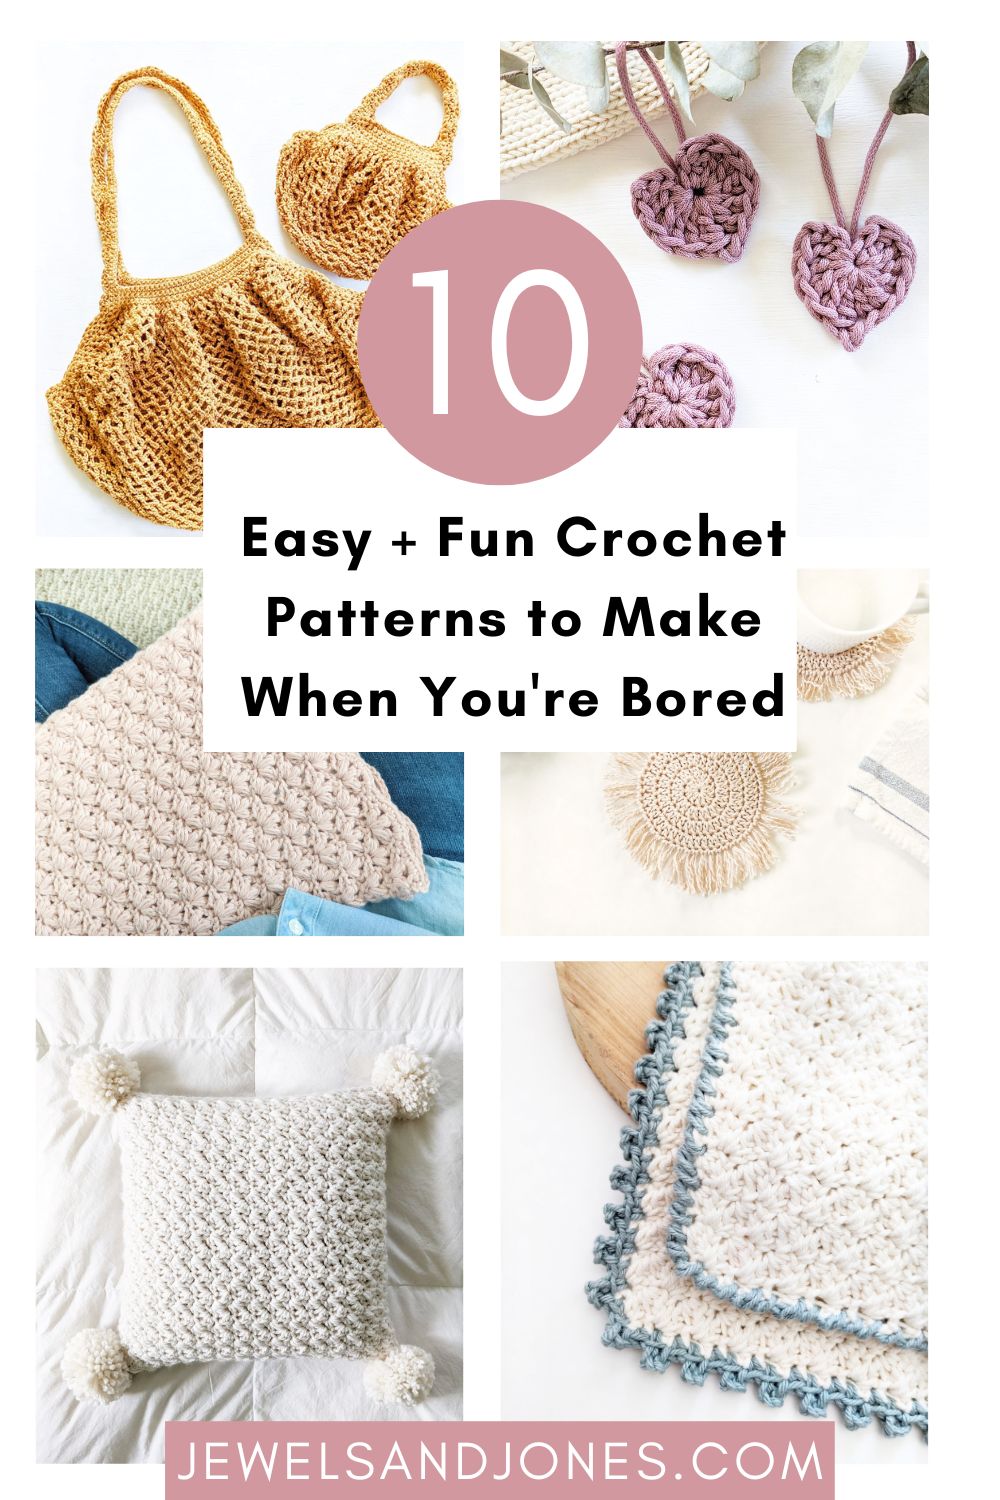 Quick Crochet Patterns to Make When You're Bored